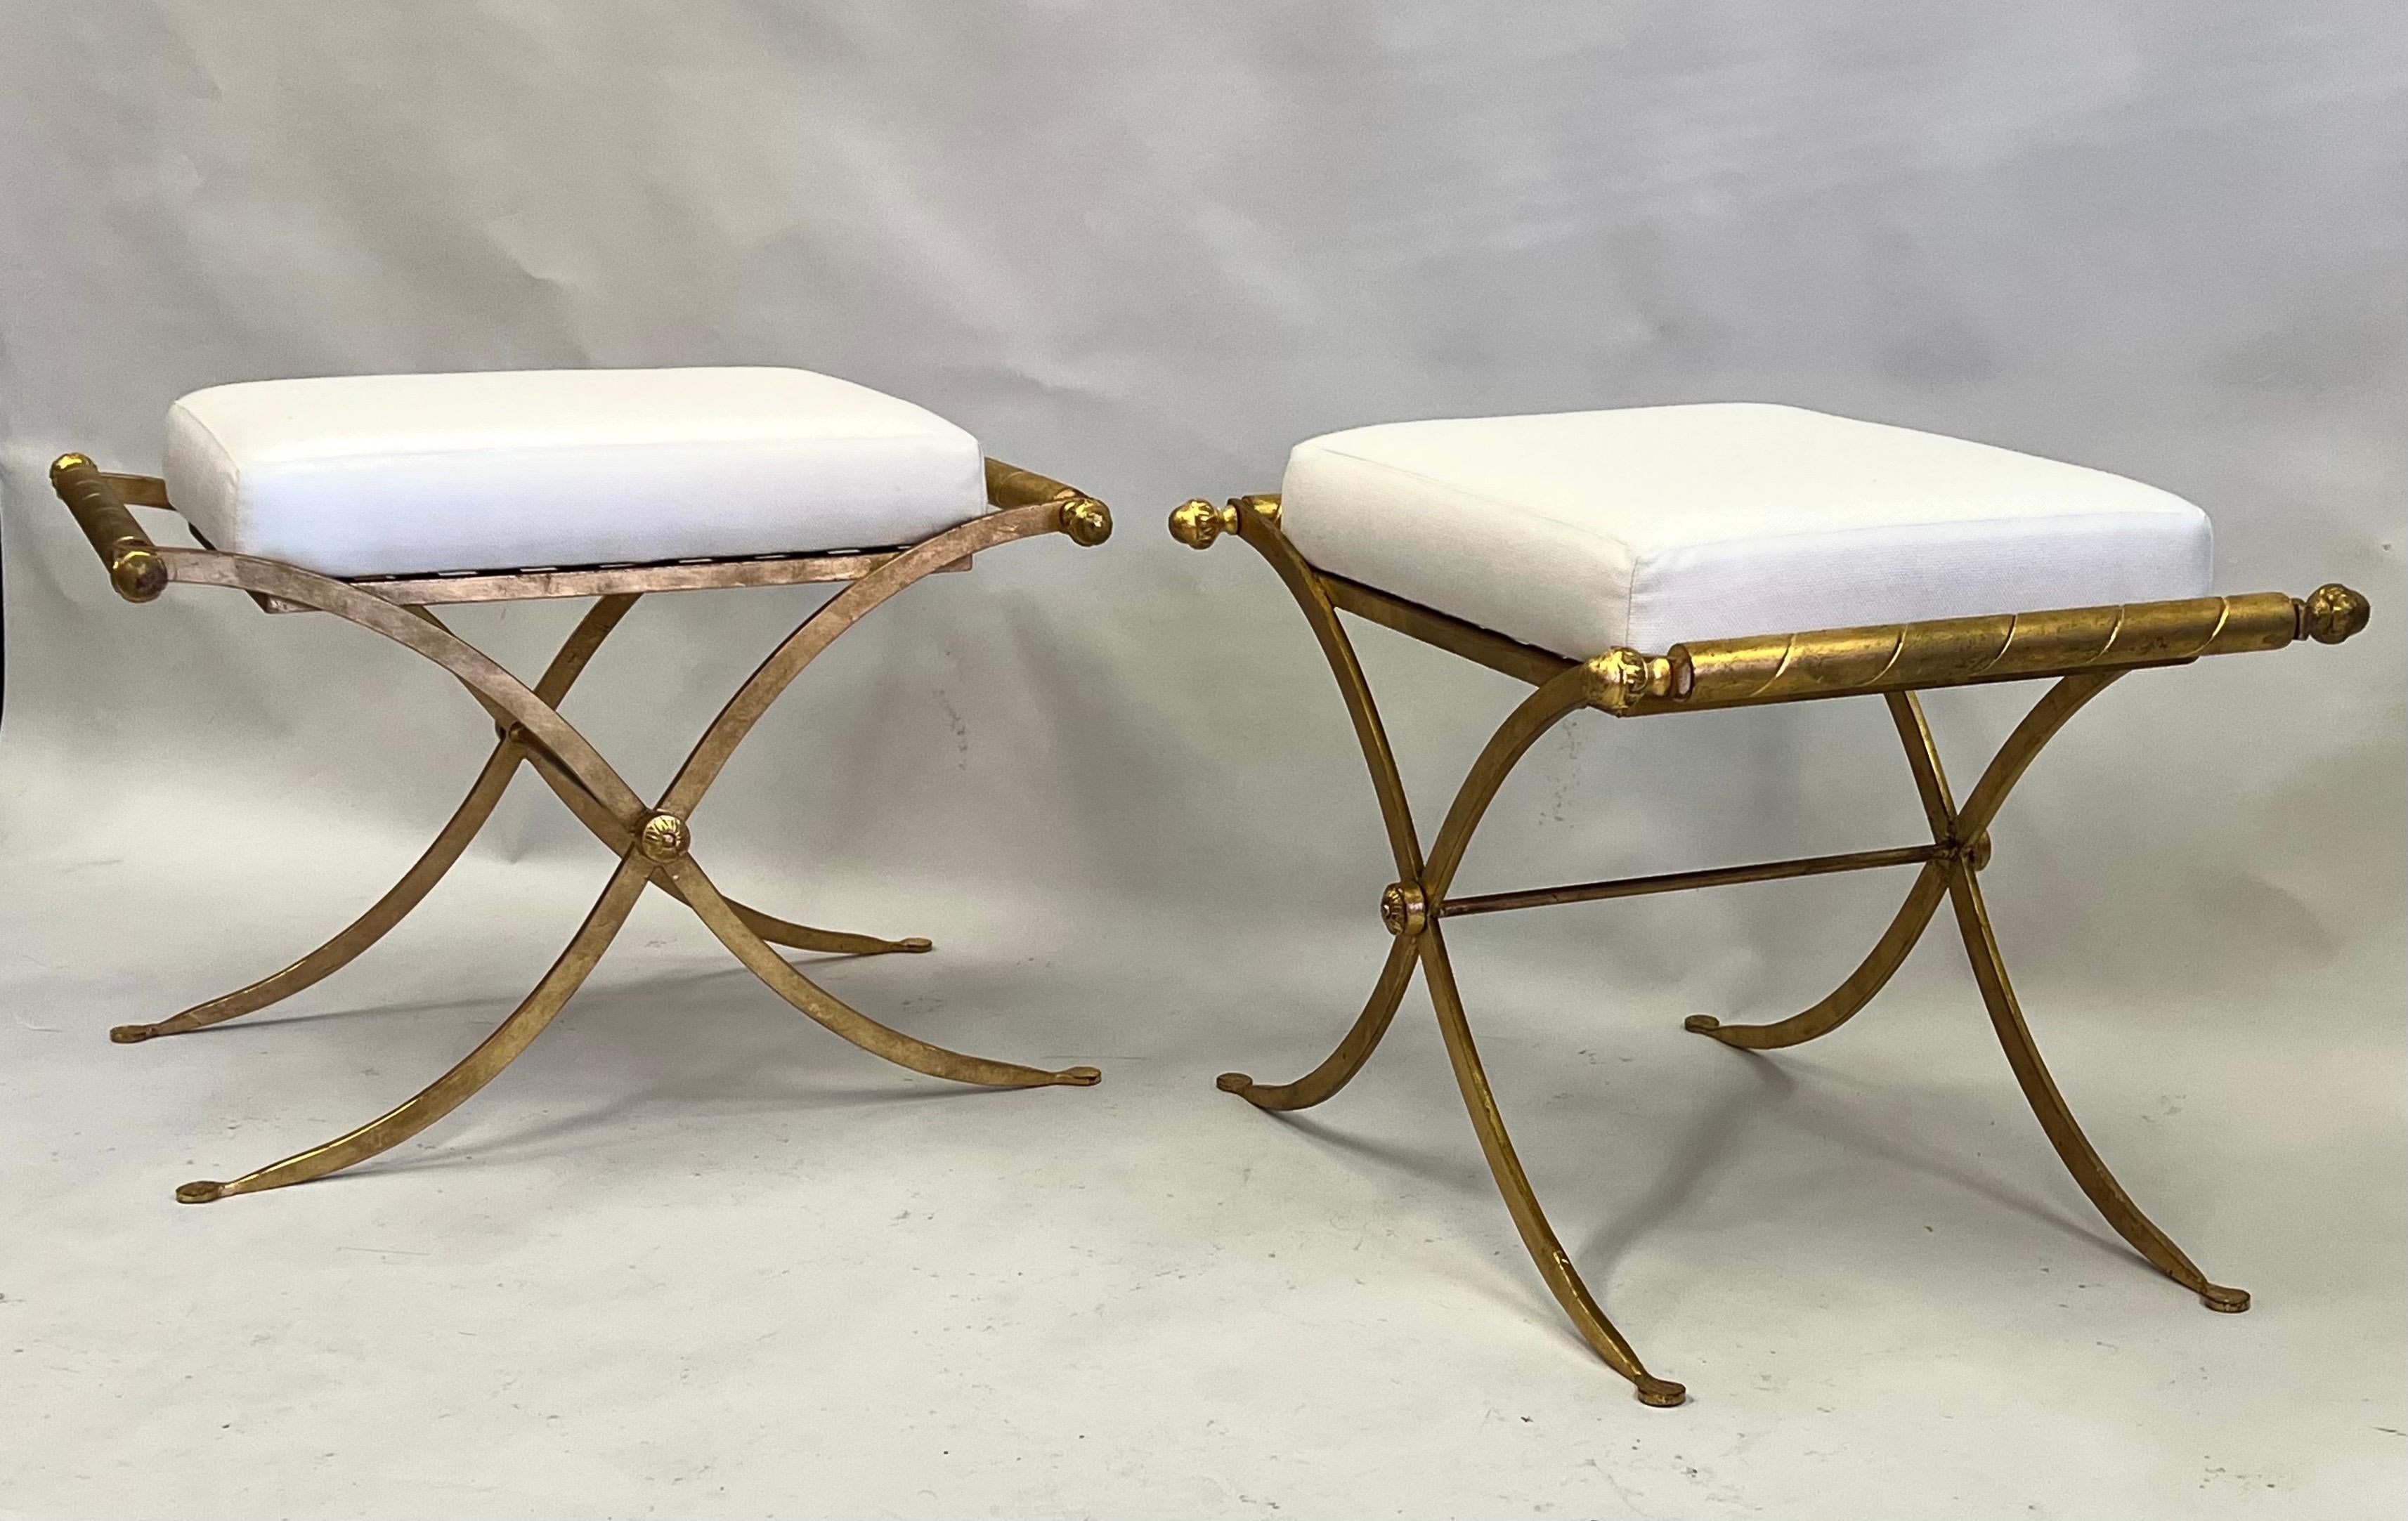 Wrought Iron Pair of French Midcentury Modern Neoclassical Gilt Iron Benches, Raymond Subes